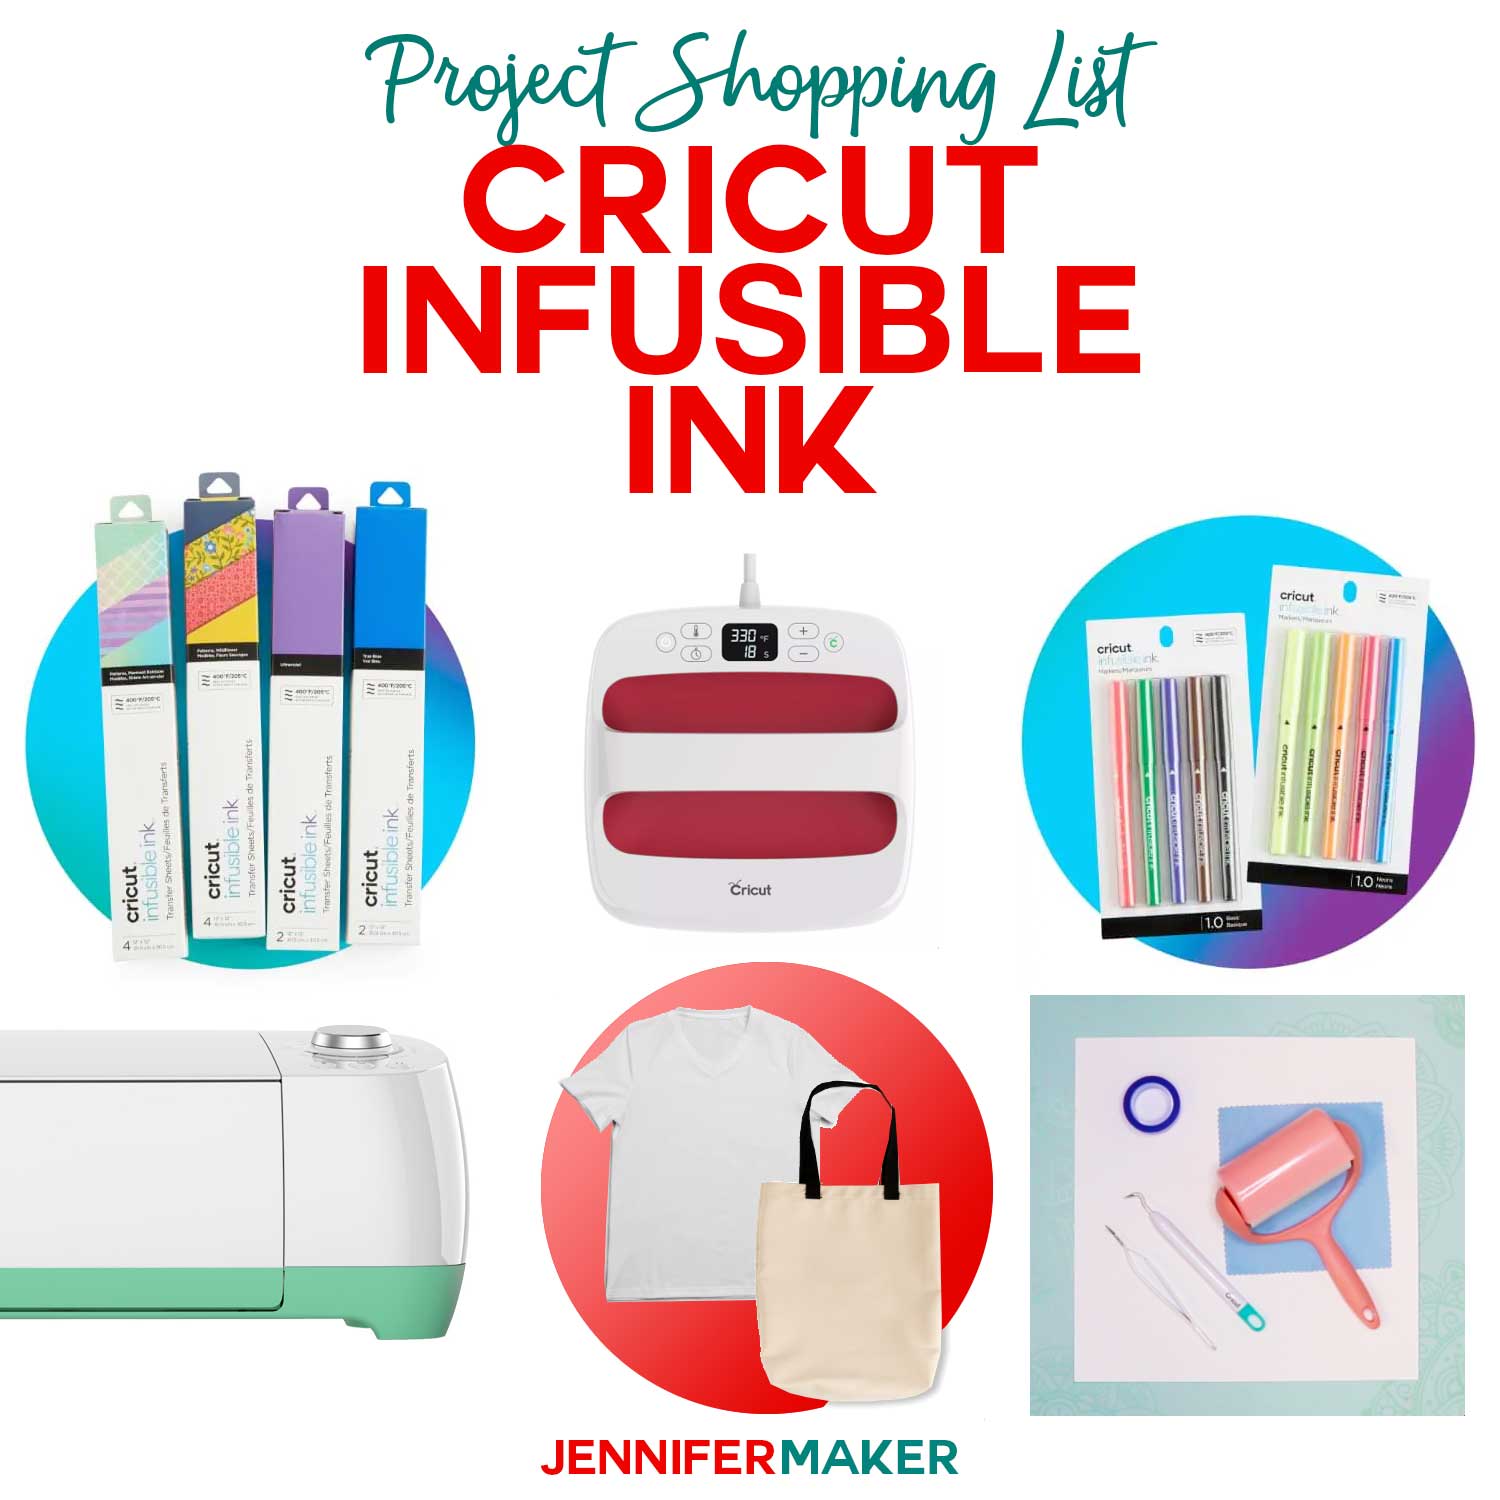 Cricut Infusible Ink - What to Buy and Project Supplies to Get Started #cricut #infusibleink #easypress